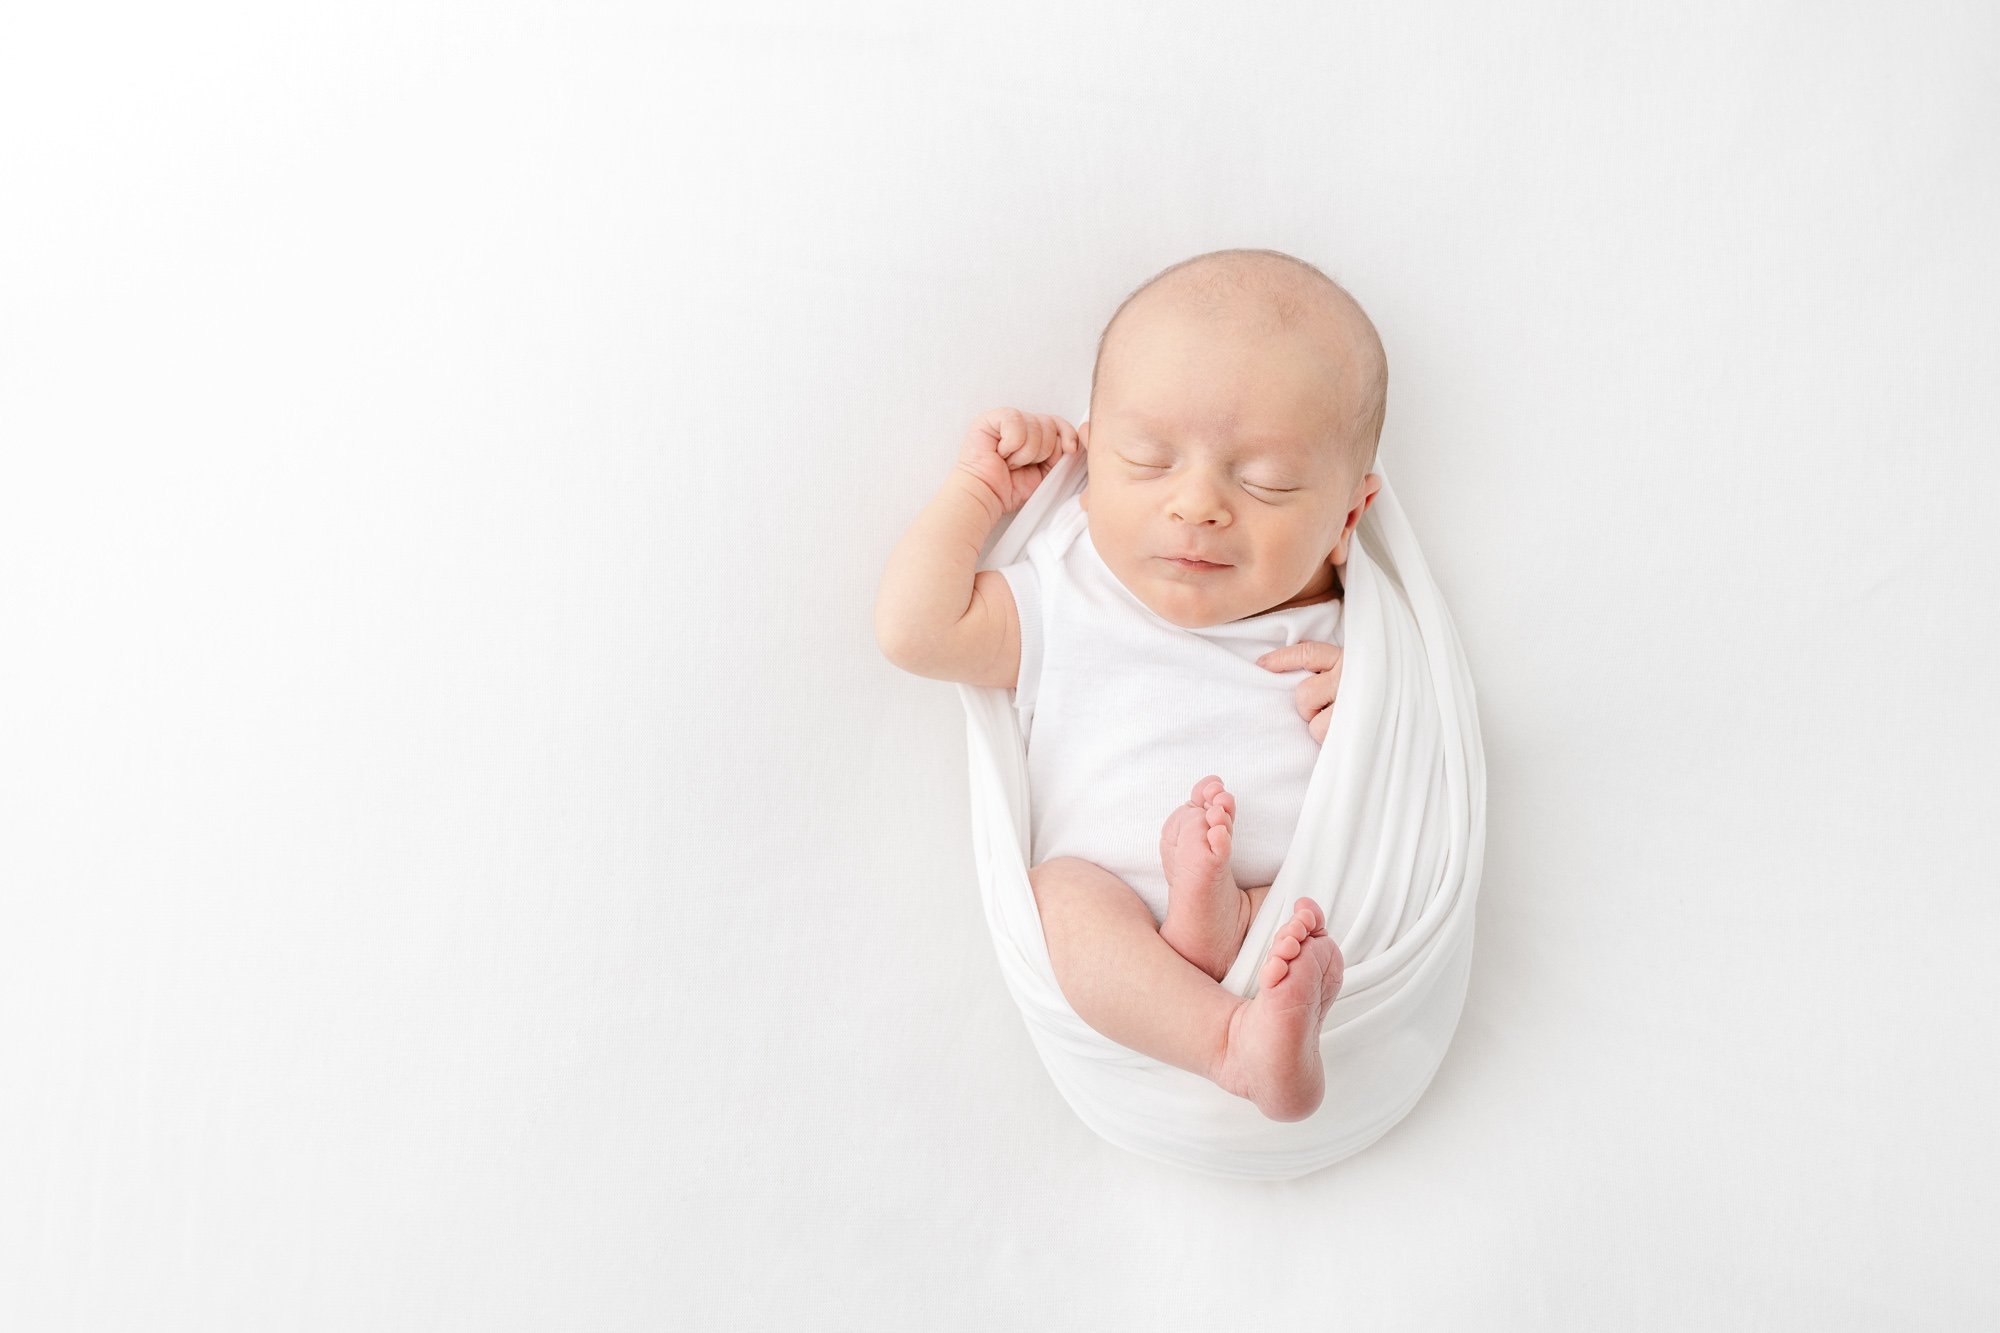  Nicole Hawkins photography can arrange for her preferred hair and makeup artist to come in on the day of an in studio shoot and prepare Mom for the session. #NicoleHawkinsphotography #newbornportraits #NewJerseynewbornphotographer #NewJerseyportrait